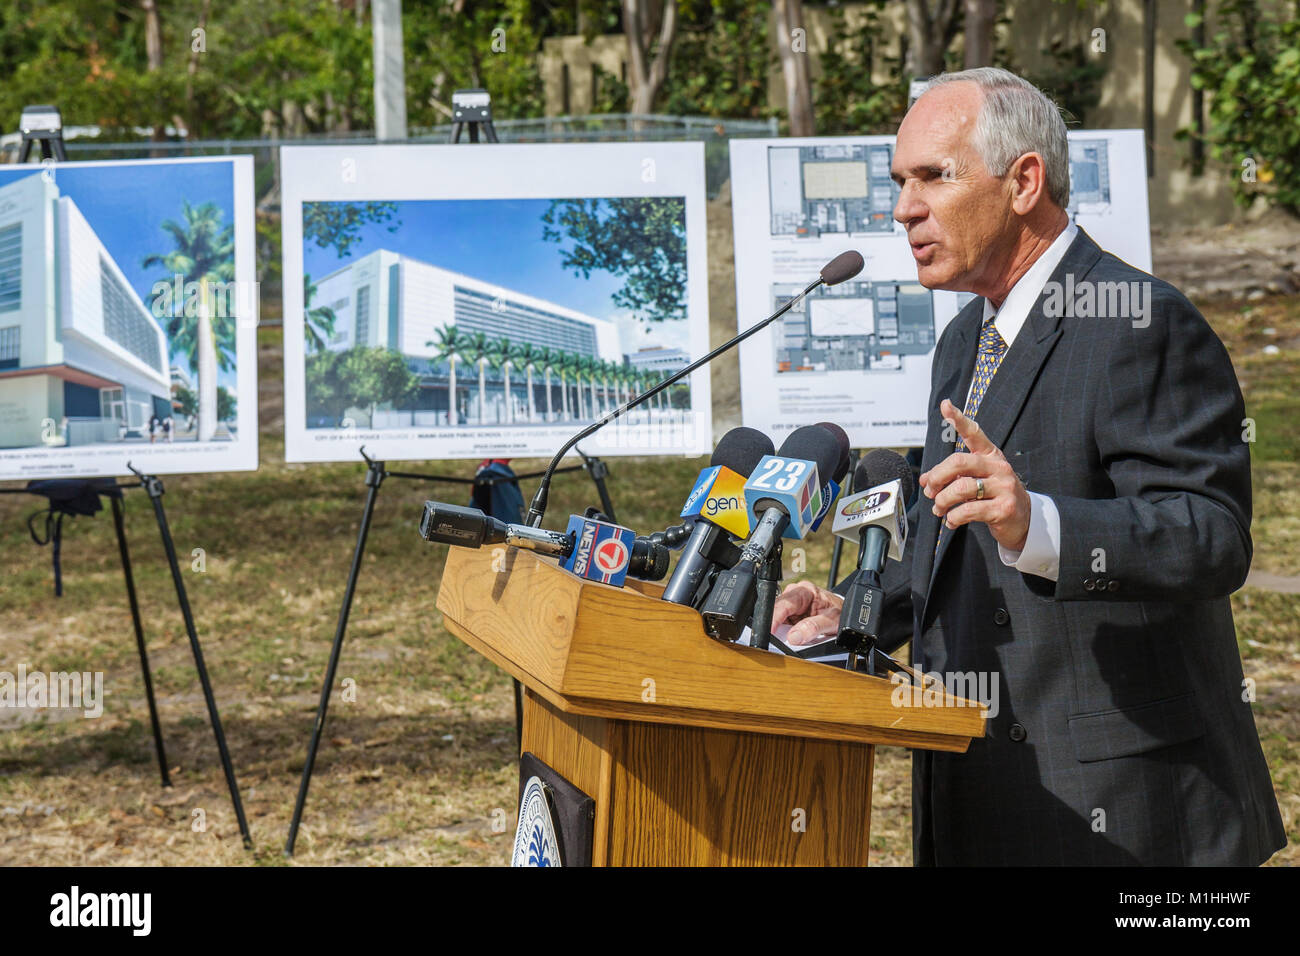 Miami Florida,College of Policing,groundbreaking ceremony,law enforcement,education,criminology,architectural rendering,Hispanic man men male,City Man Stock Photo